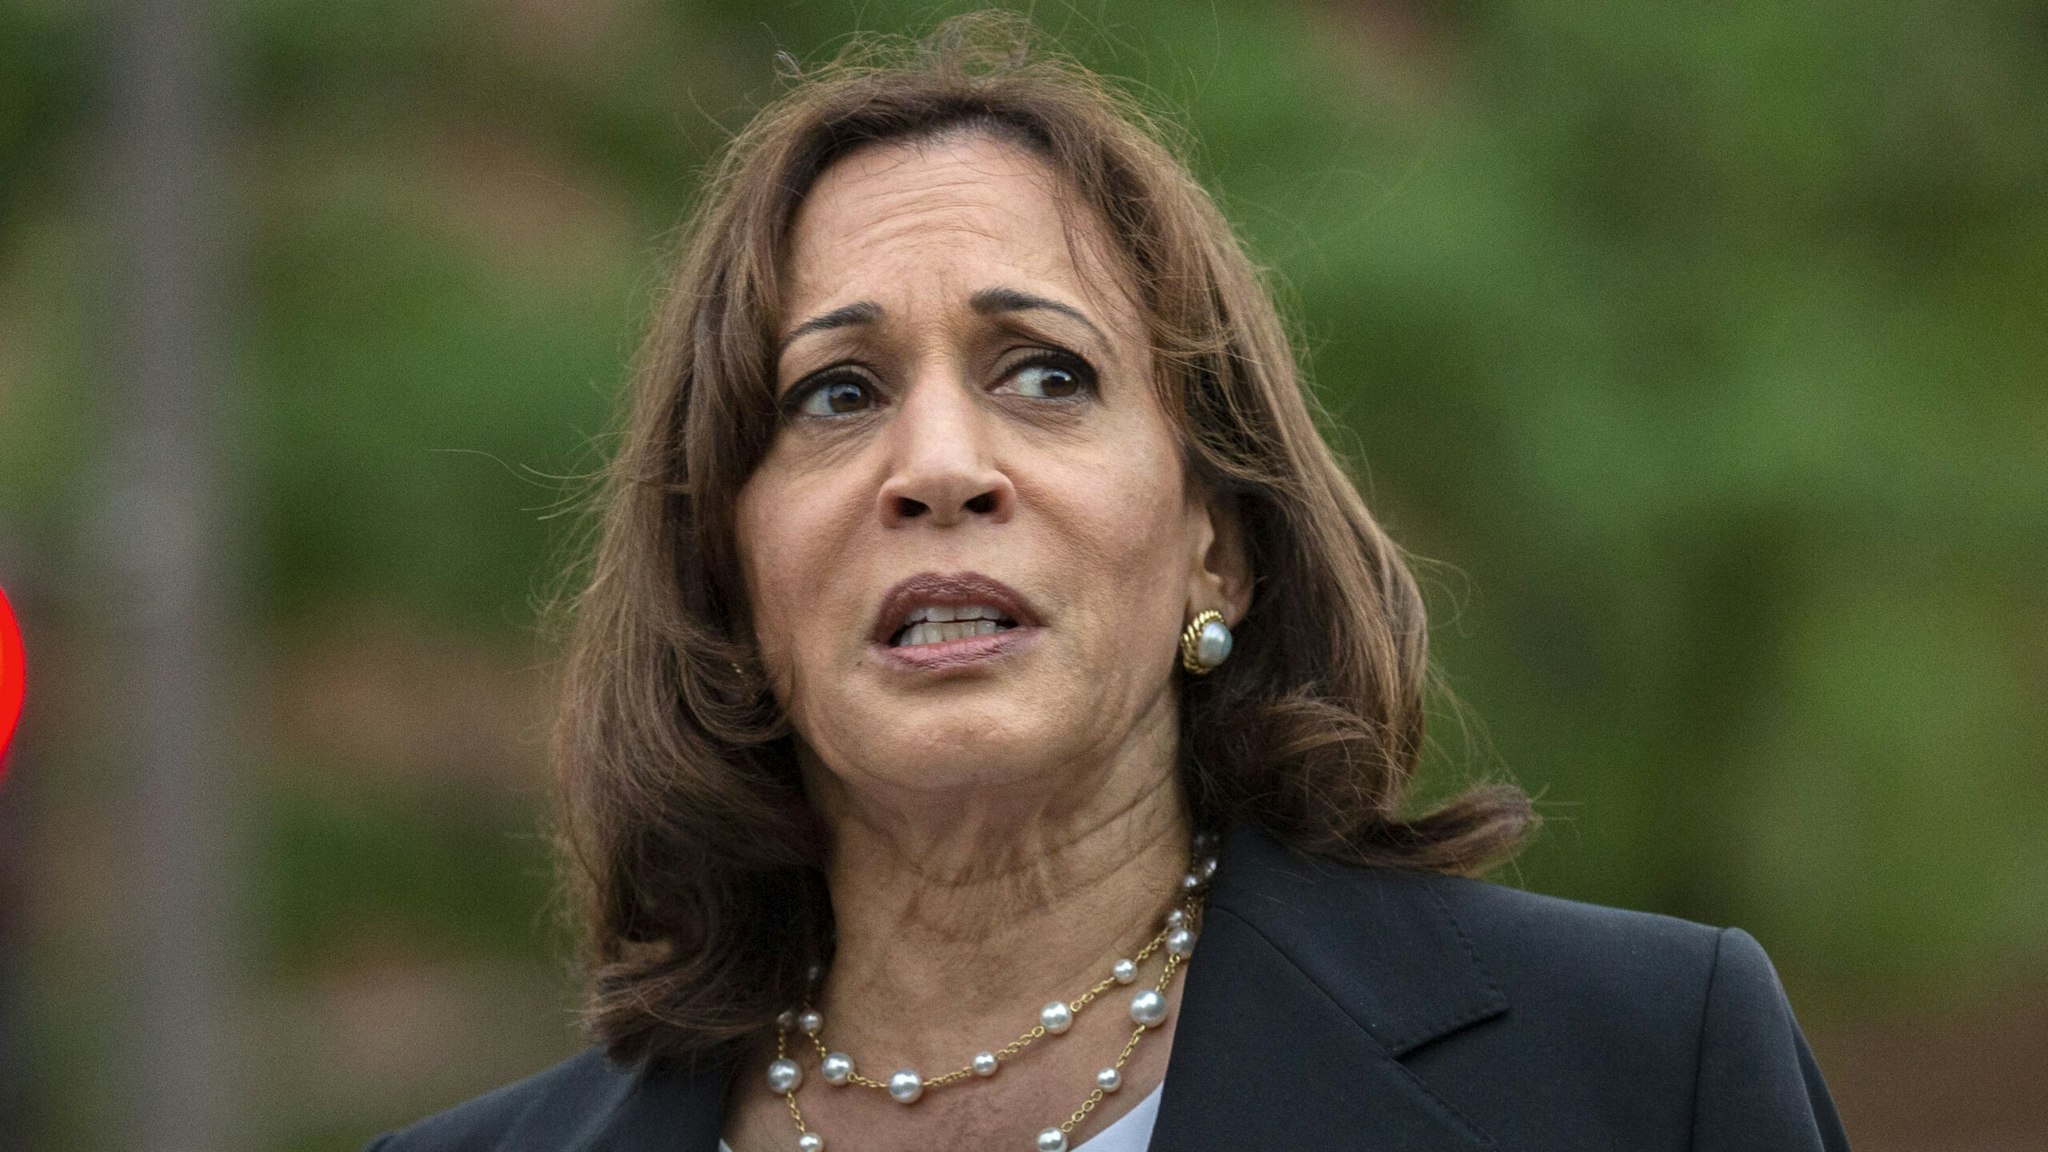 HIGHLAND PARK, IL - JULY 05: U.S. Vice President Kamala Harris speaks, near the scene of a mass shooting yesterday during a Fourth of July parade, on July 5, 2022 in Highland Park, Illinois. Authorities have charged Robert “Bobby” E. Crimo III, 22, with seven counts of first-degree murder in the attack that also injured 47, according to published reports.